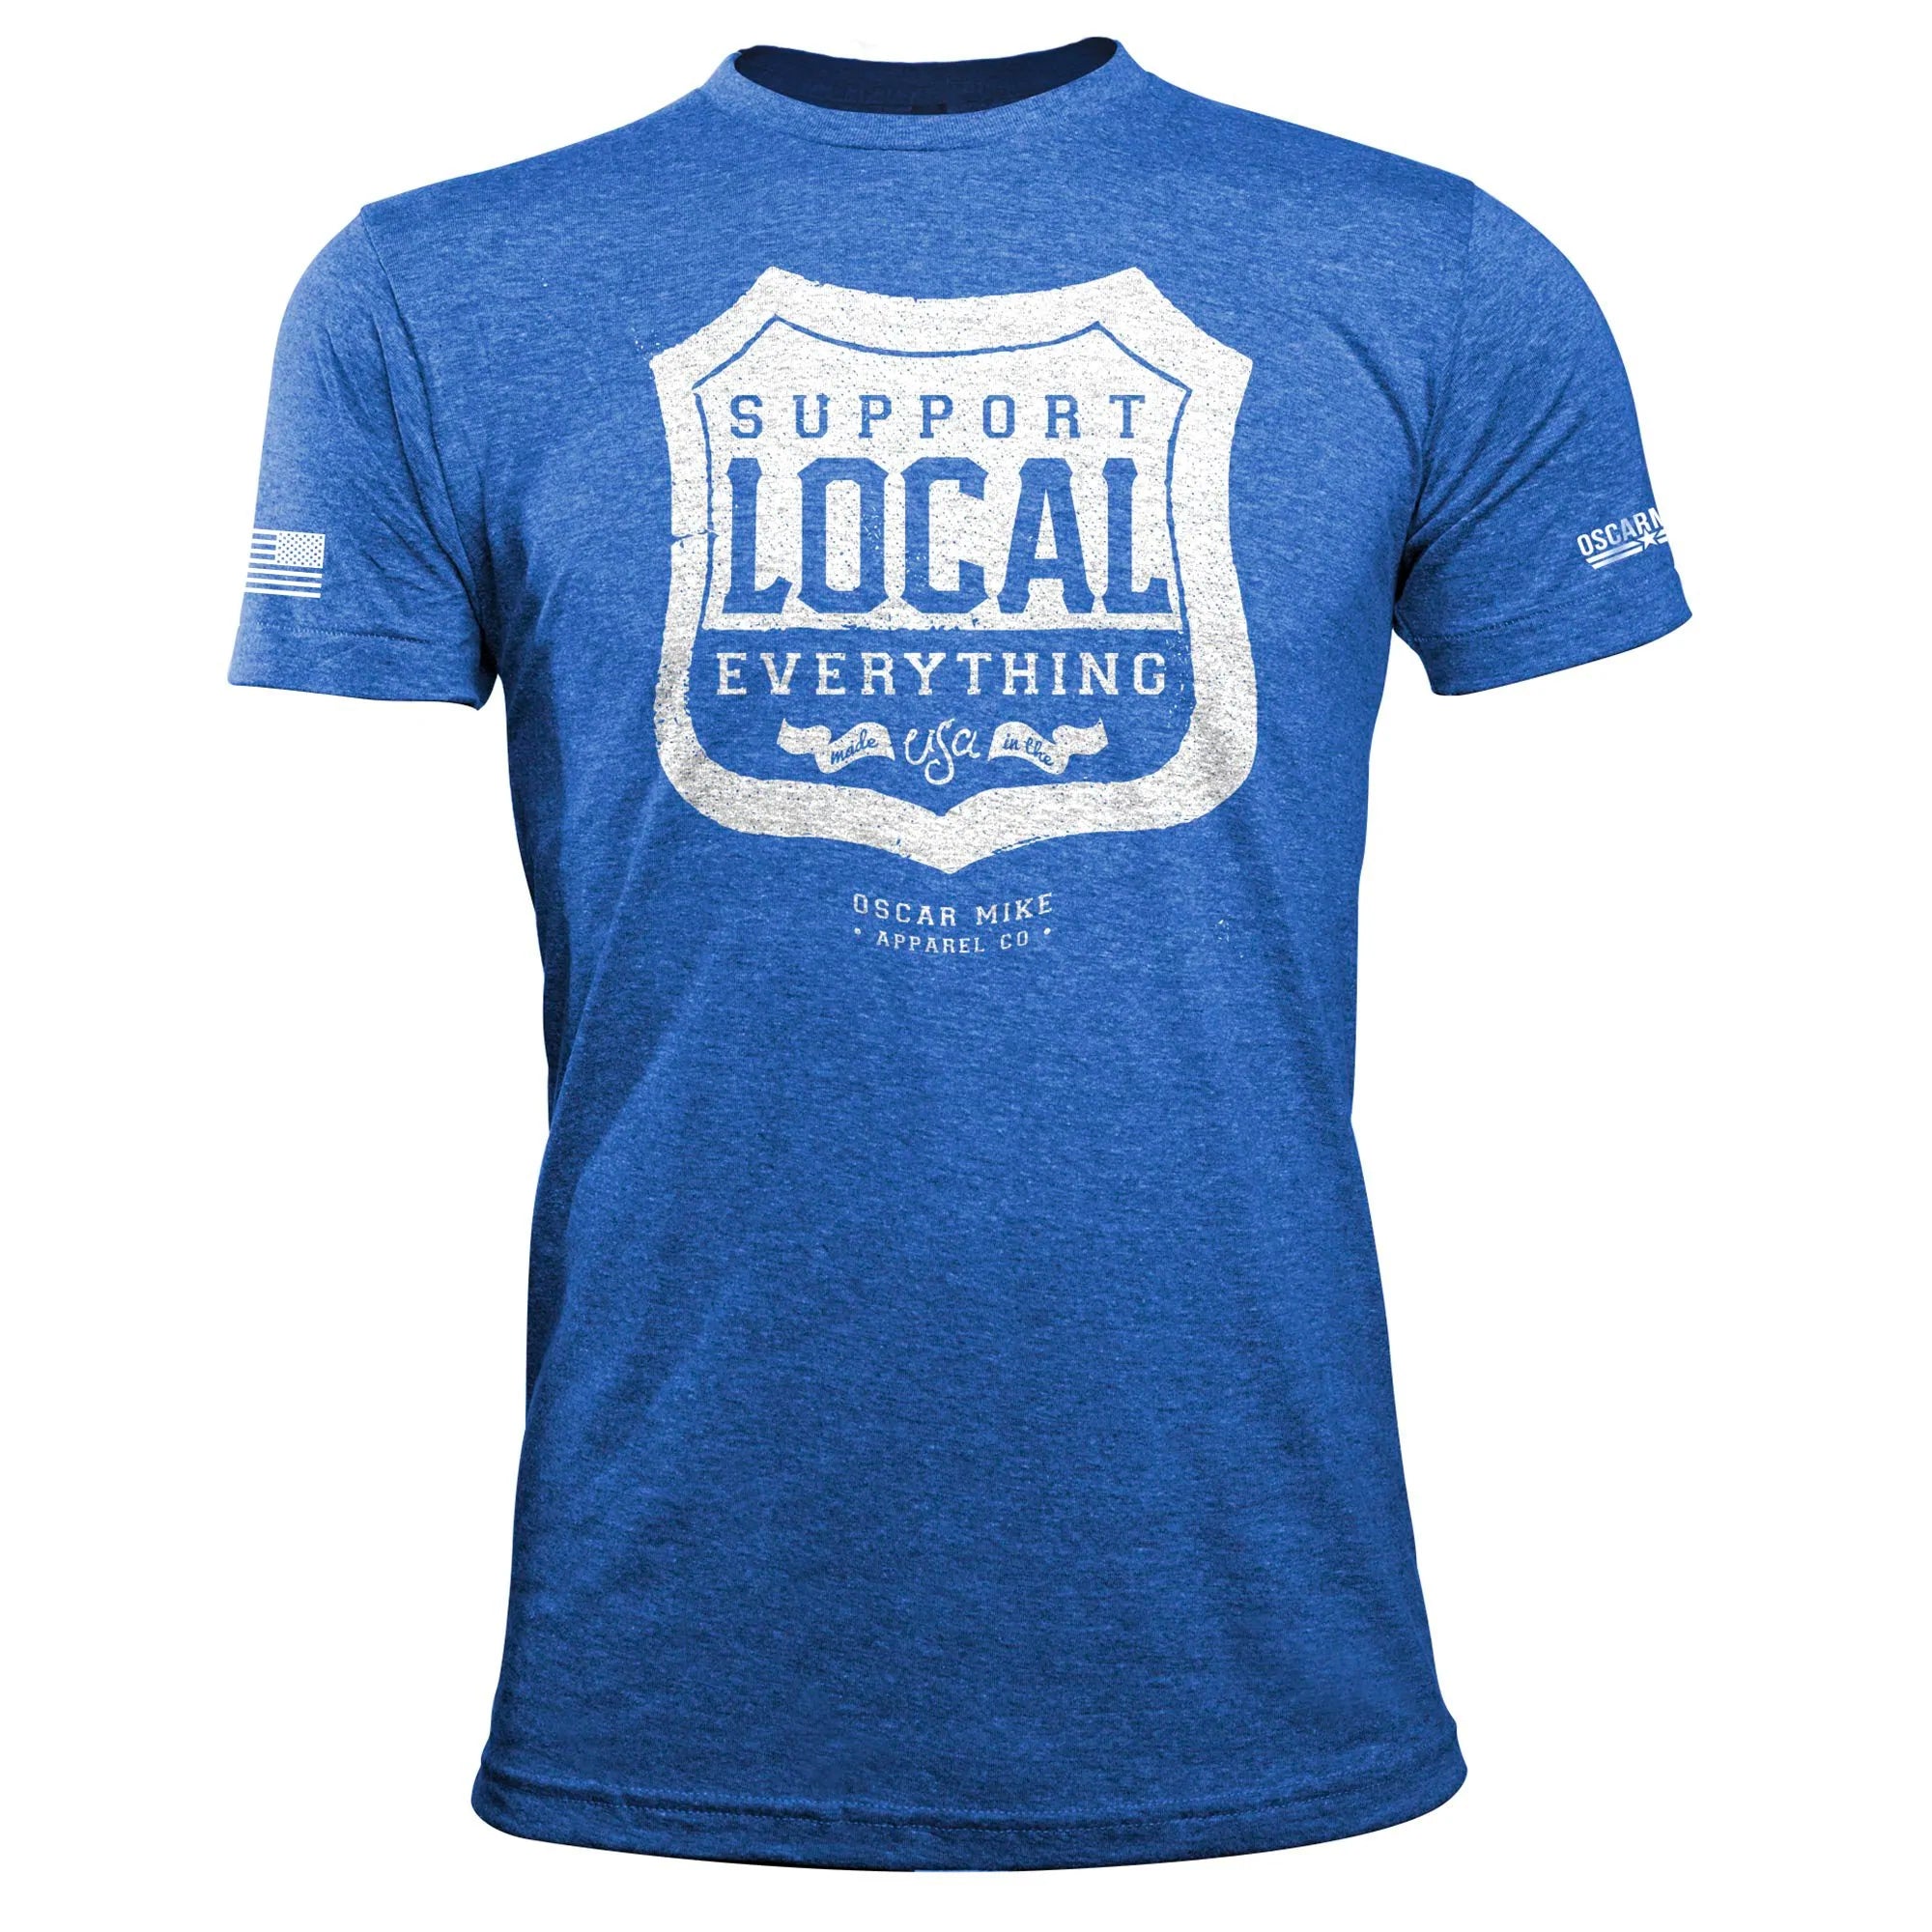 Support Local Everything Tee - Oscar Mike Apparel